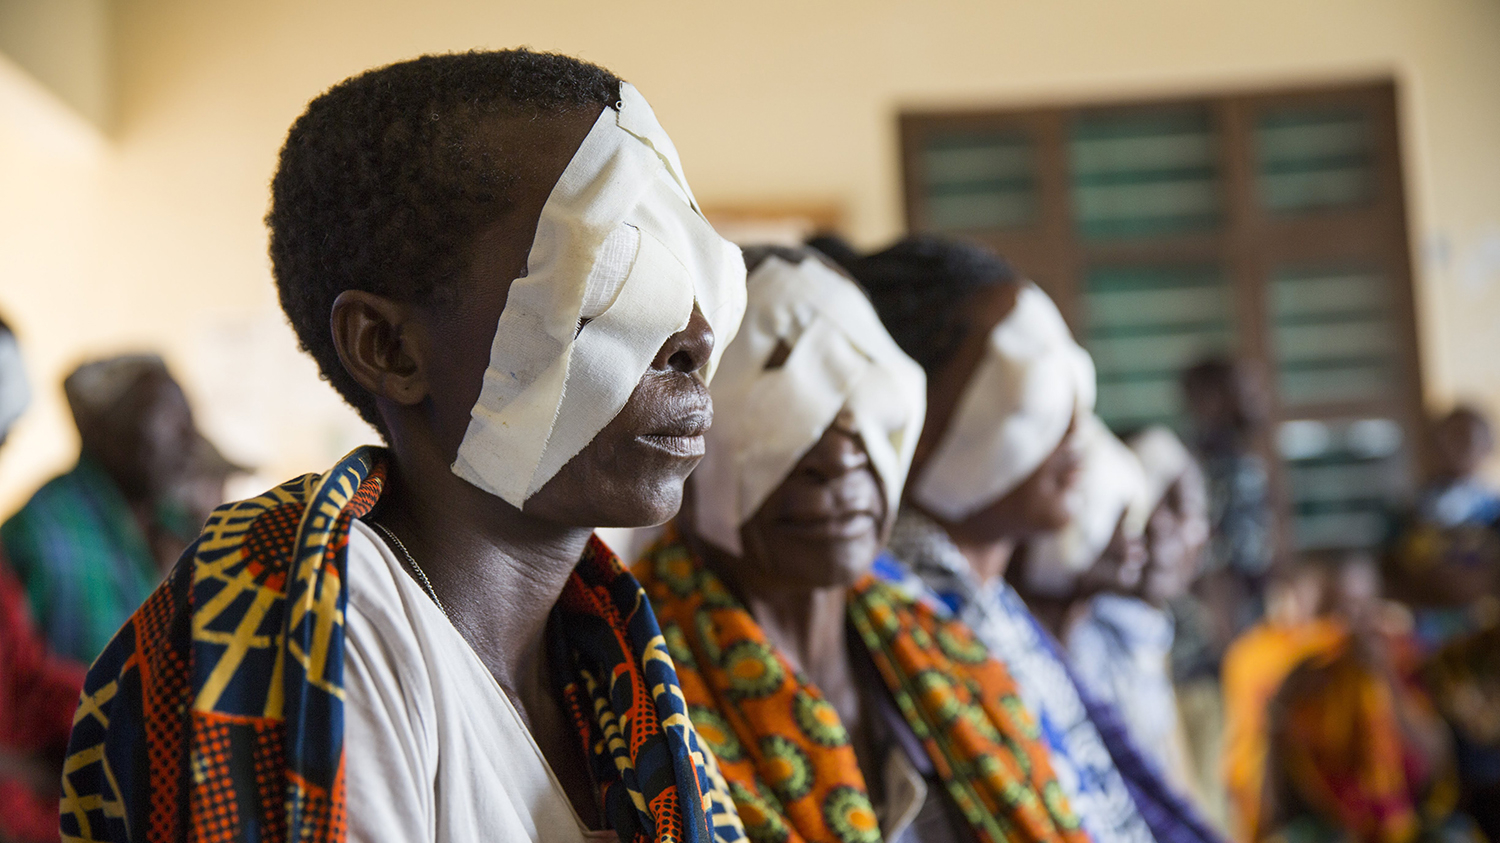 People are sitting in a row with bandages over their eyes after receiving surgery for trachoma.